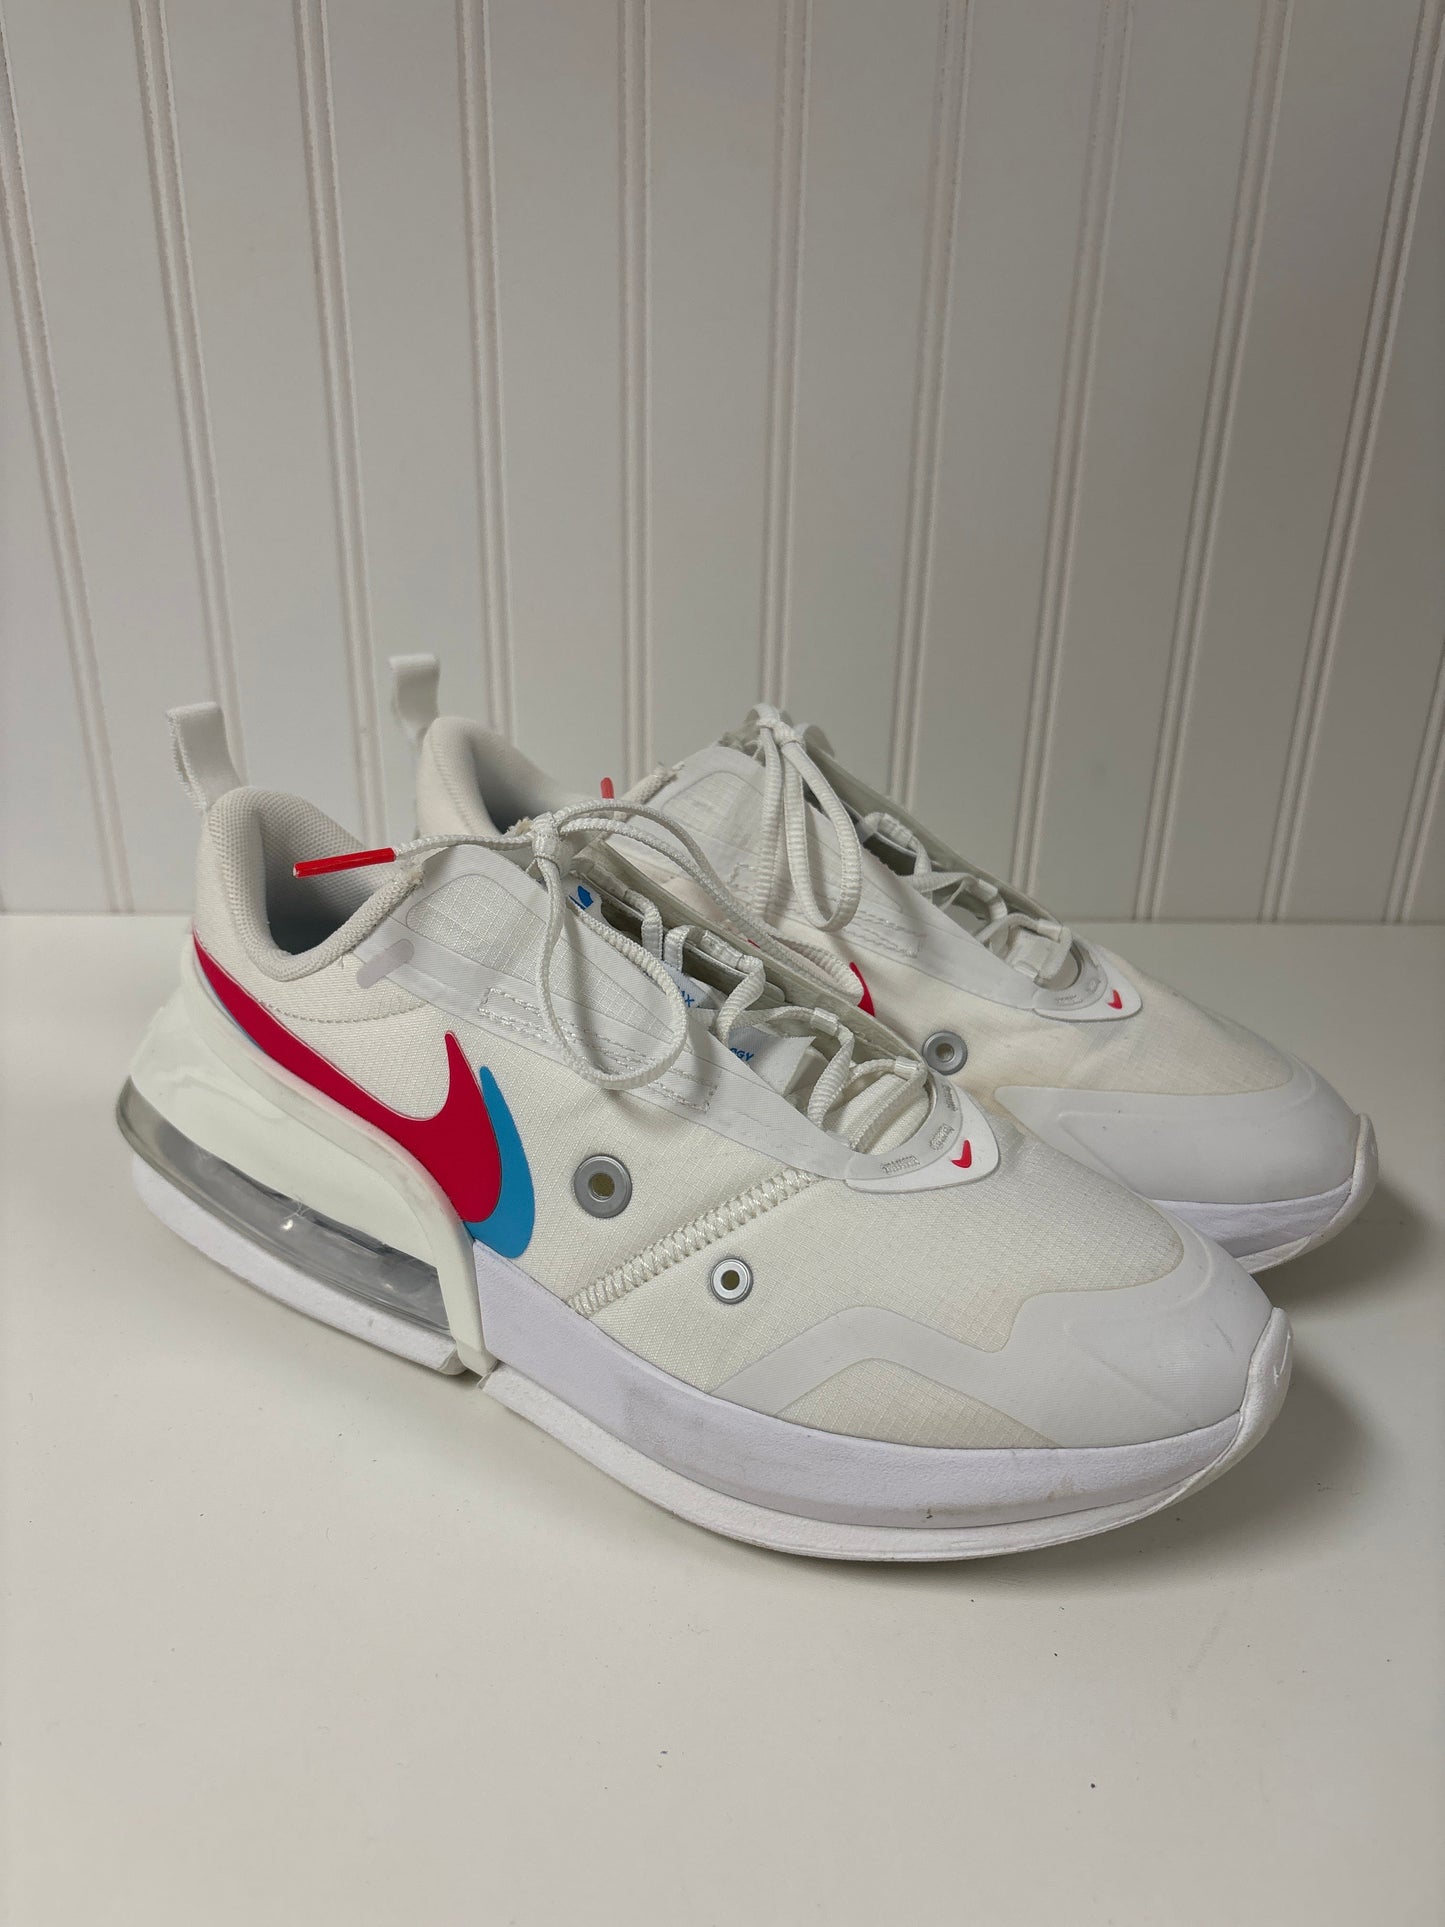 Blue & Red & White Shoes Athletic Nike, Size 8.5